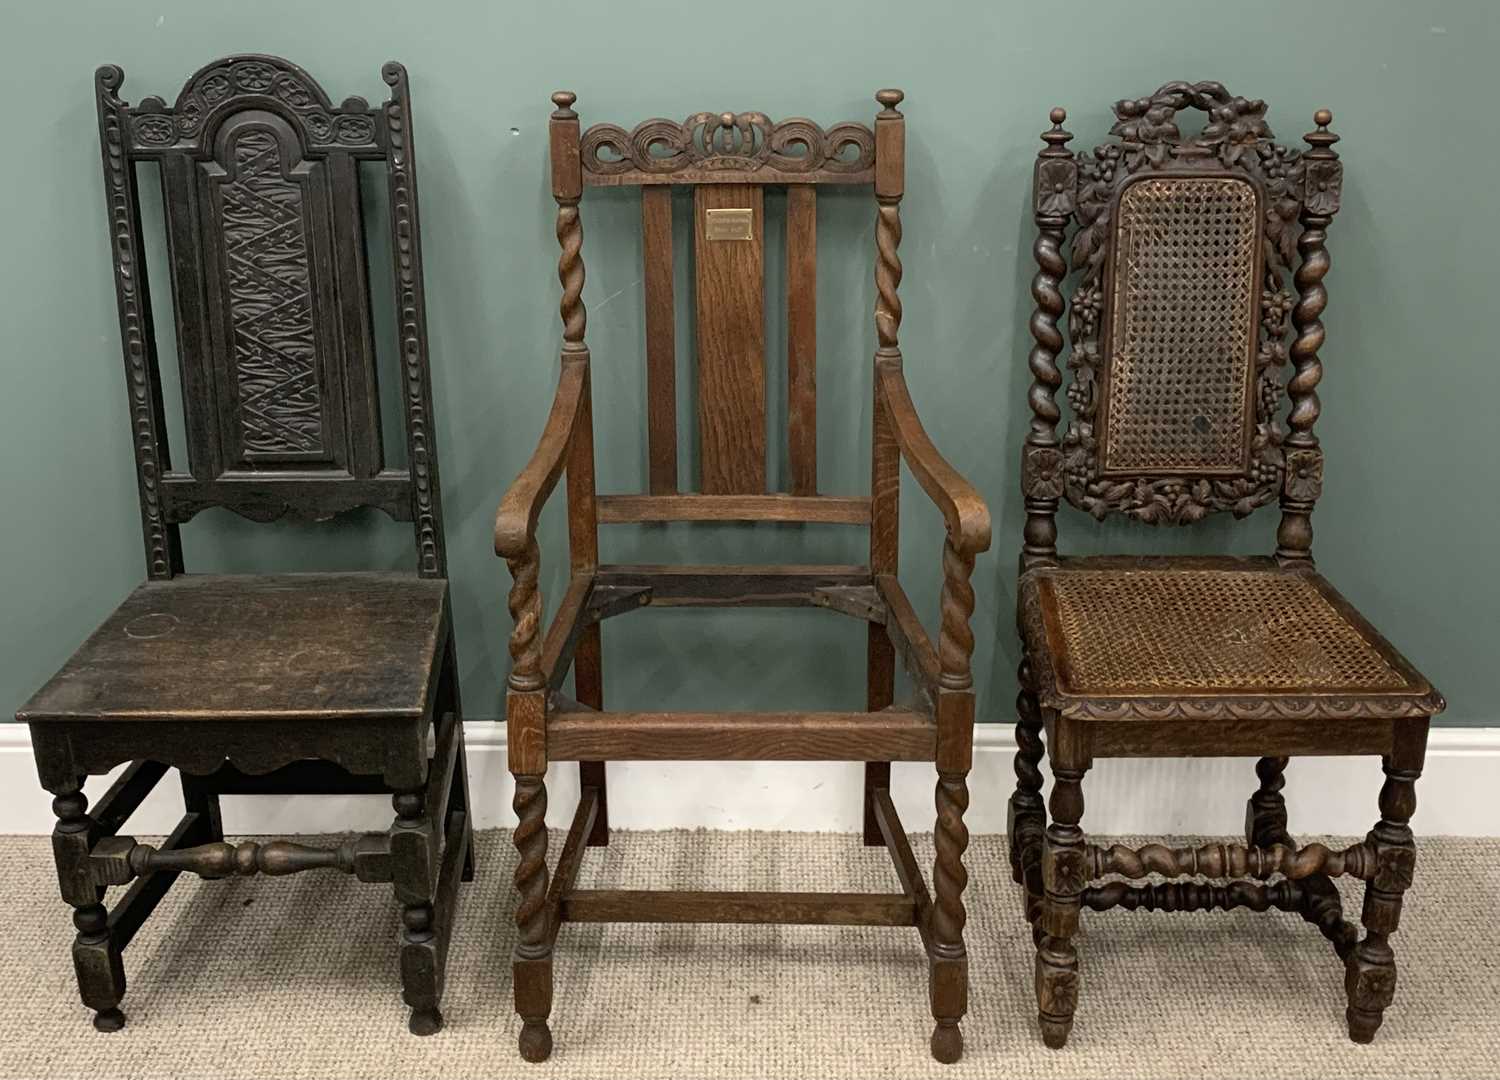 VARIOUS CHAIRS to include Windsor, wheelback, farmhouse and a carved Eisteddfod chair (13) - Image 8 of 8